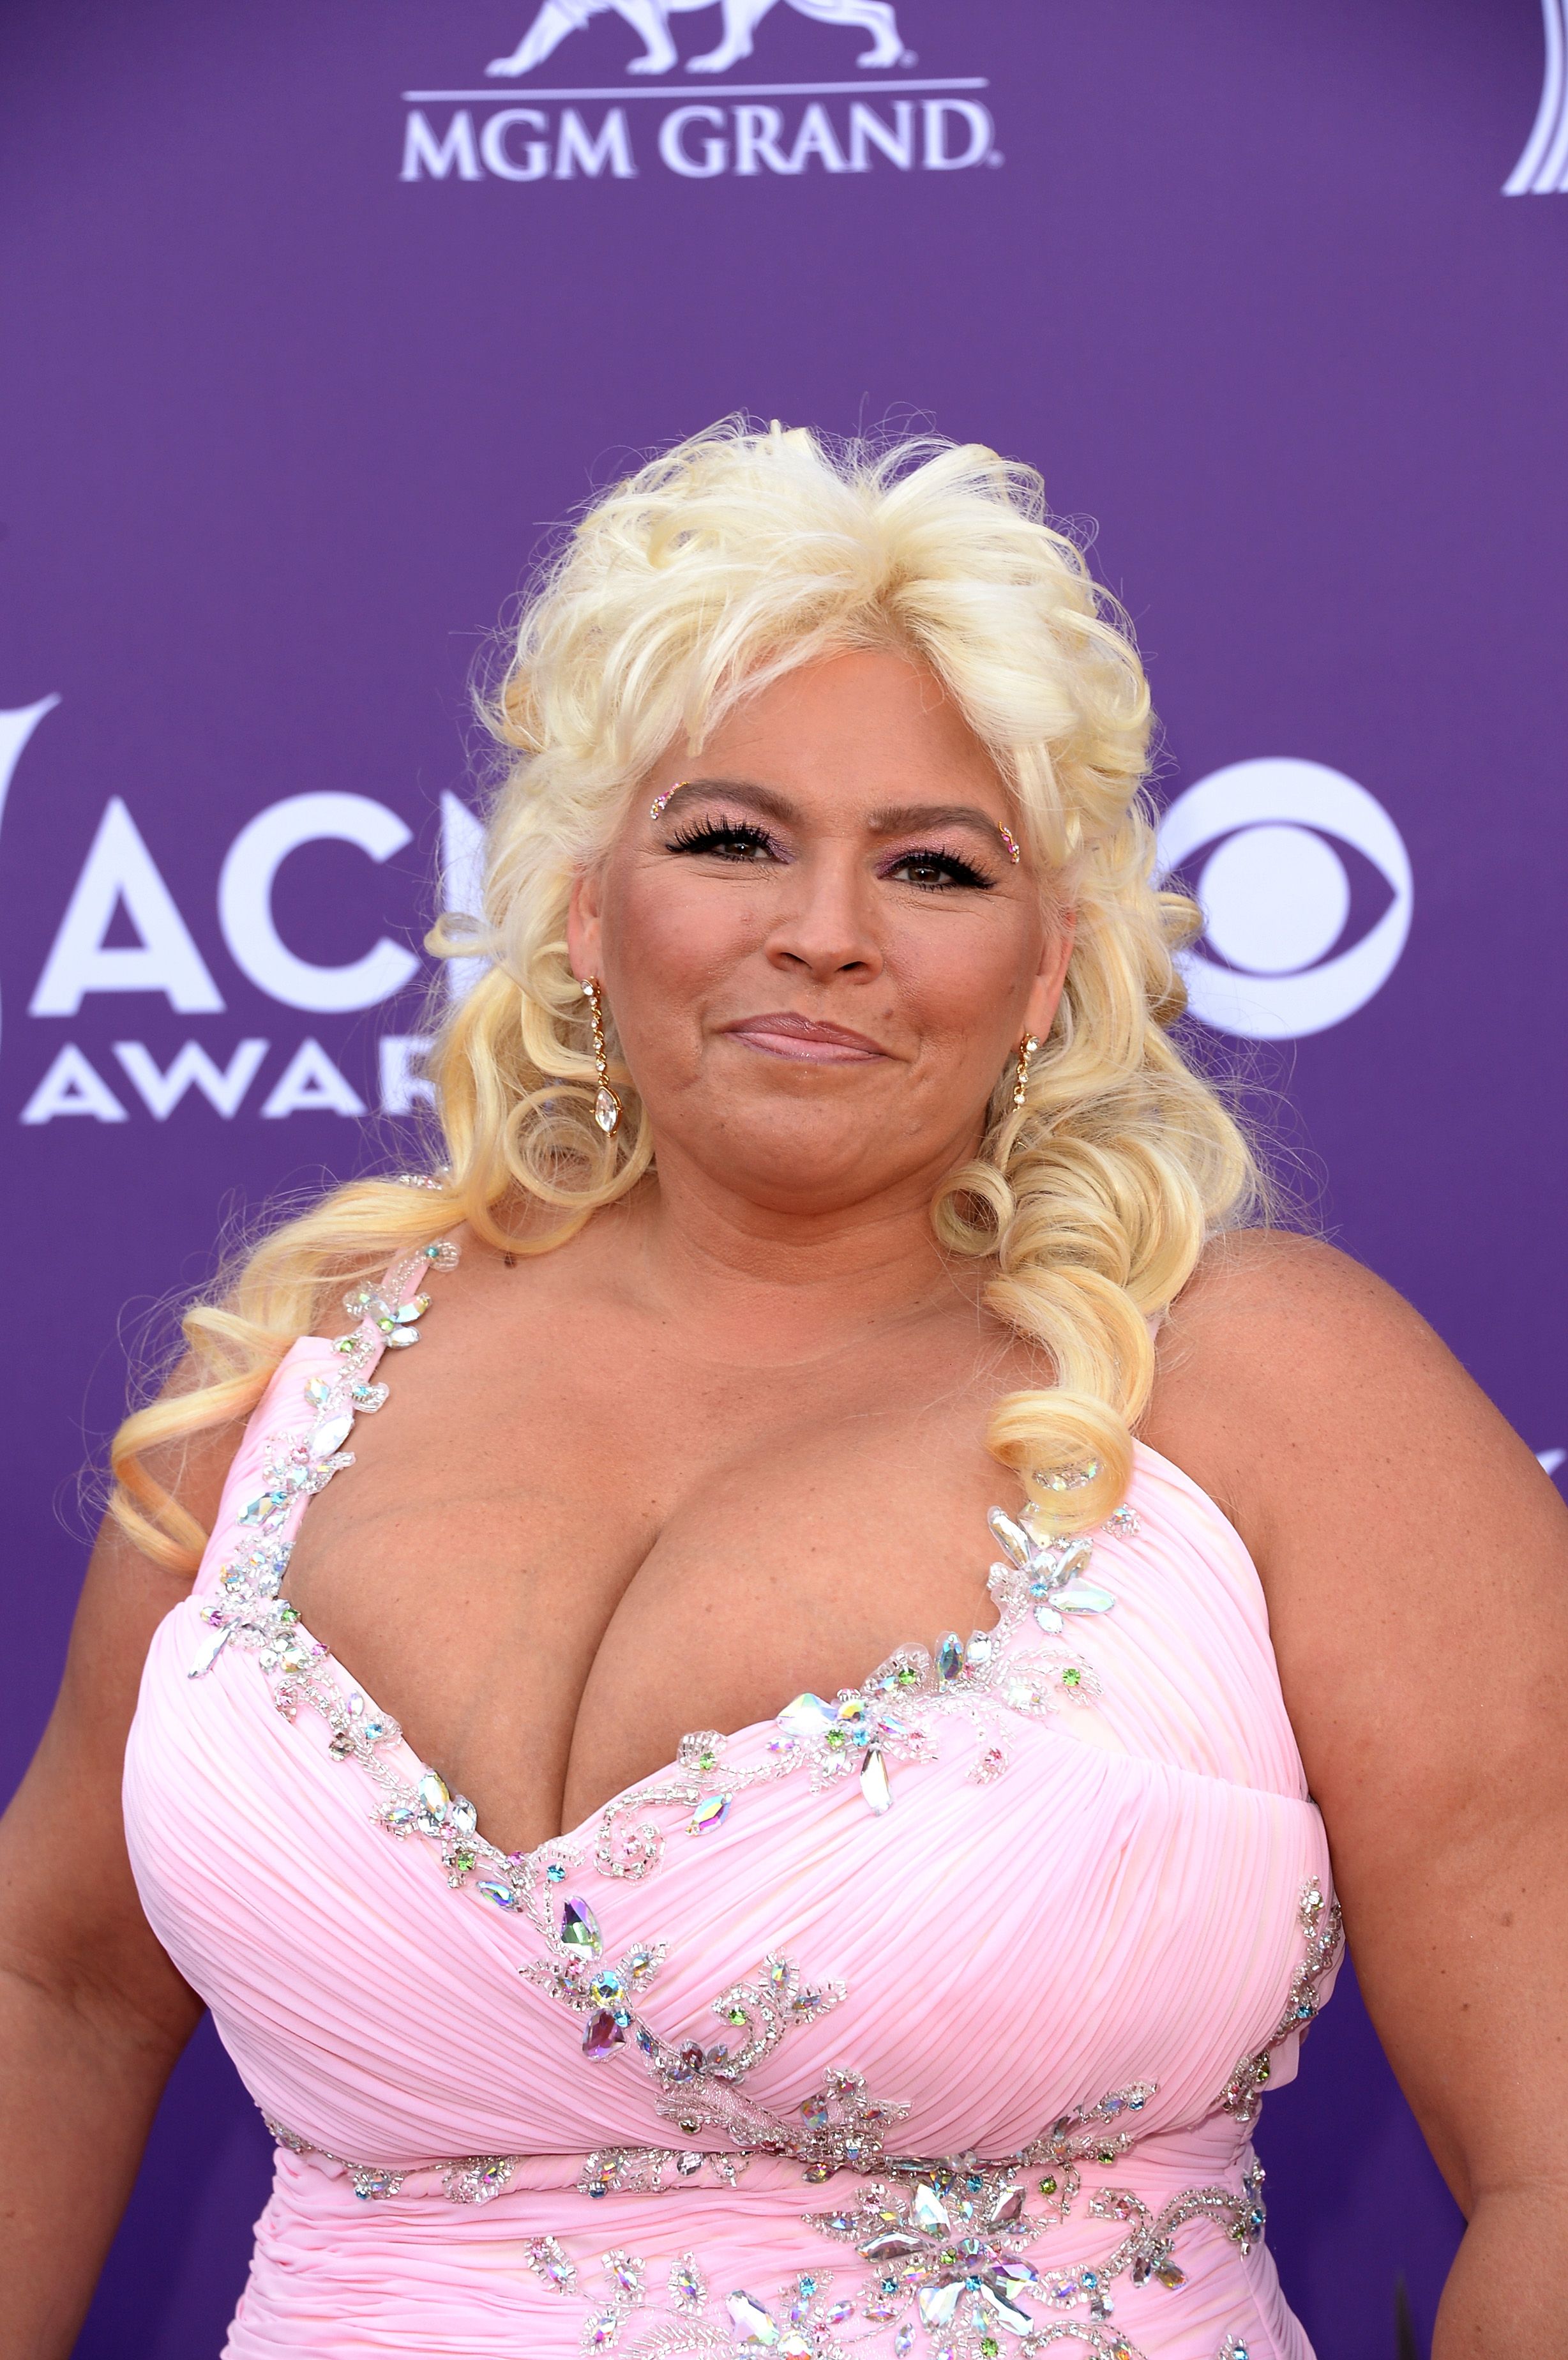 carol cater recommends beth chapman boobs pic